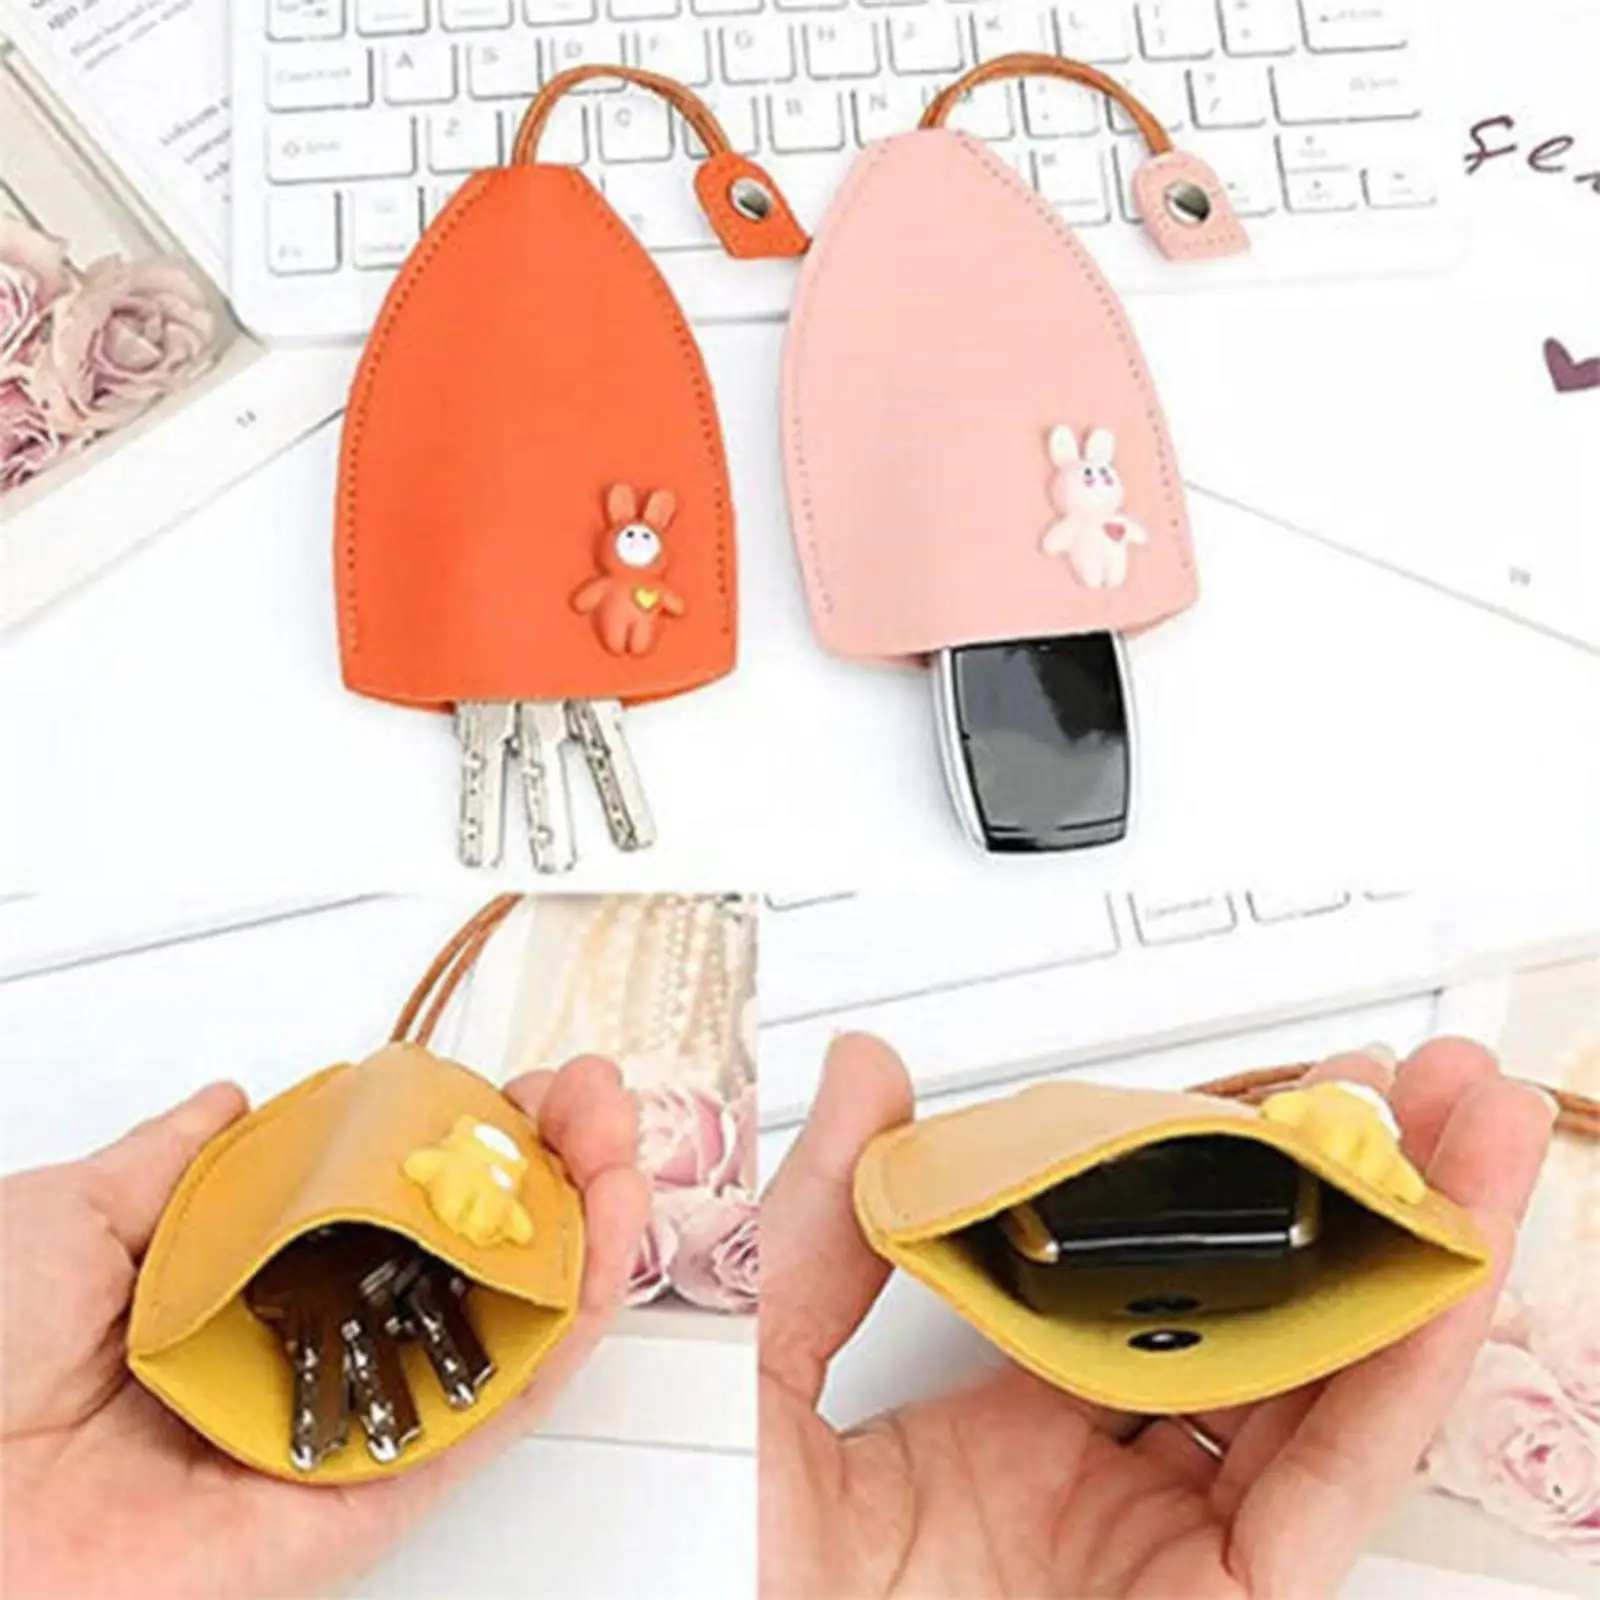 

Cute Fruits Unisex Pull Type Key Bag PU Leather Key Wallets Housekeepers Car Key Holder Case New Leather Keychain Pouch